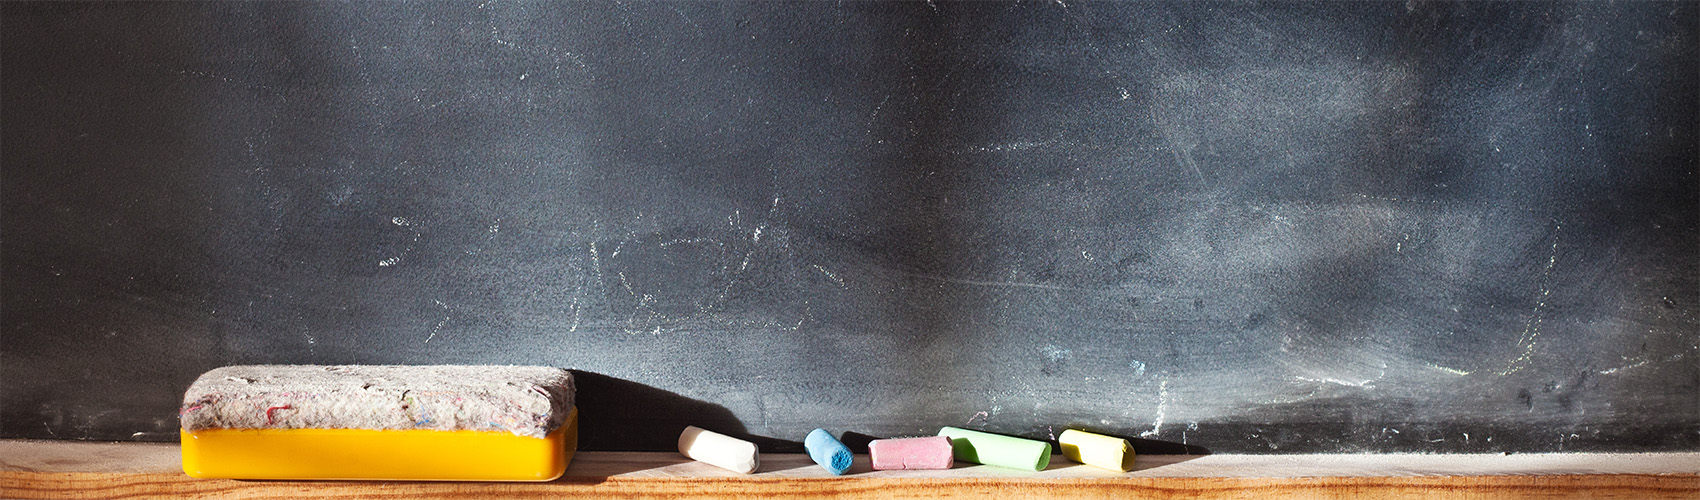 A black chalkboard with a wooden ledge holding an eraser and white, blue, red, green and yellow chalk, and chalk particles